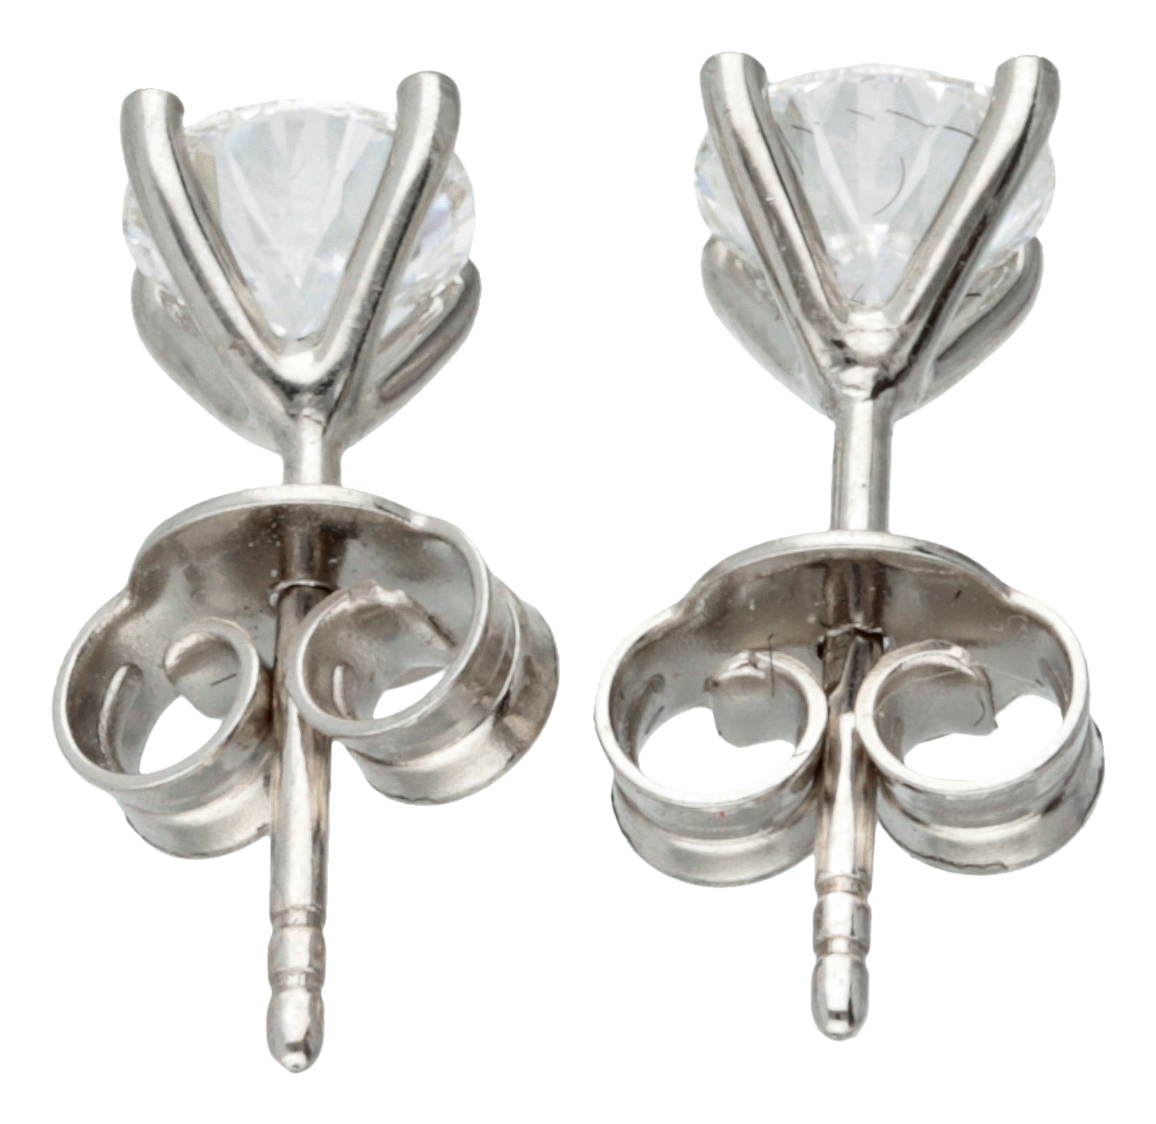 No Reserve - GIA certified 18K white gold solitaire ear studs with 1.00 ct. diamond. - Image 3 of 4